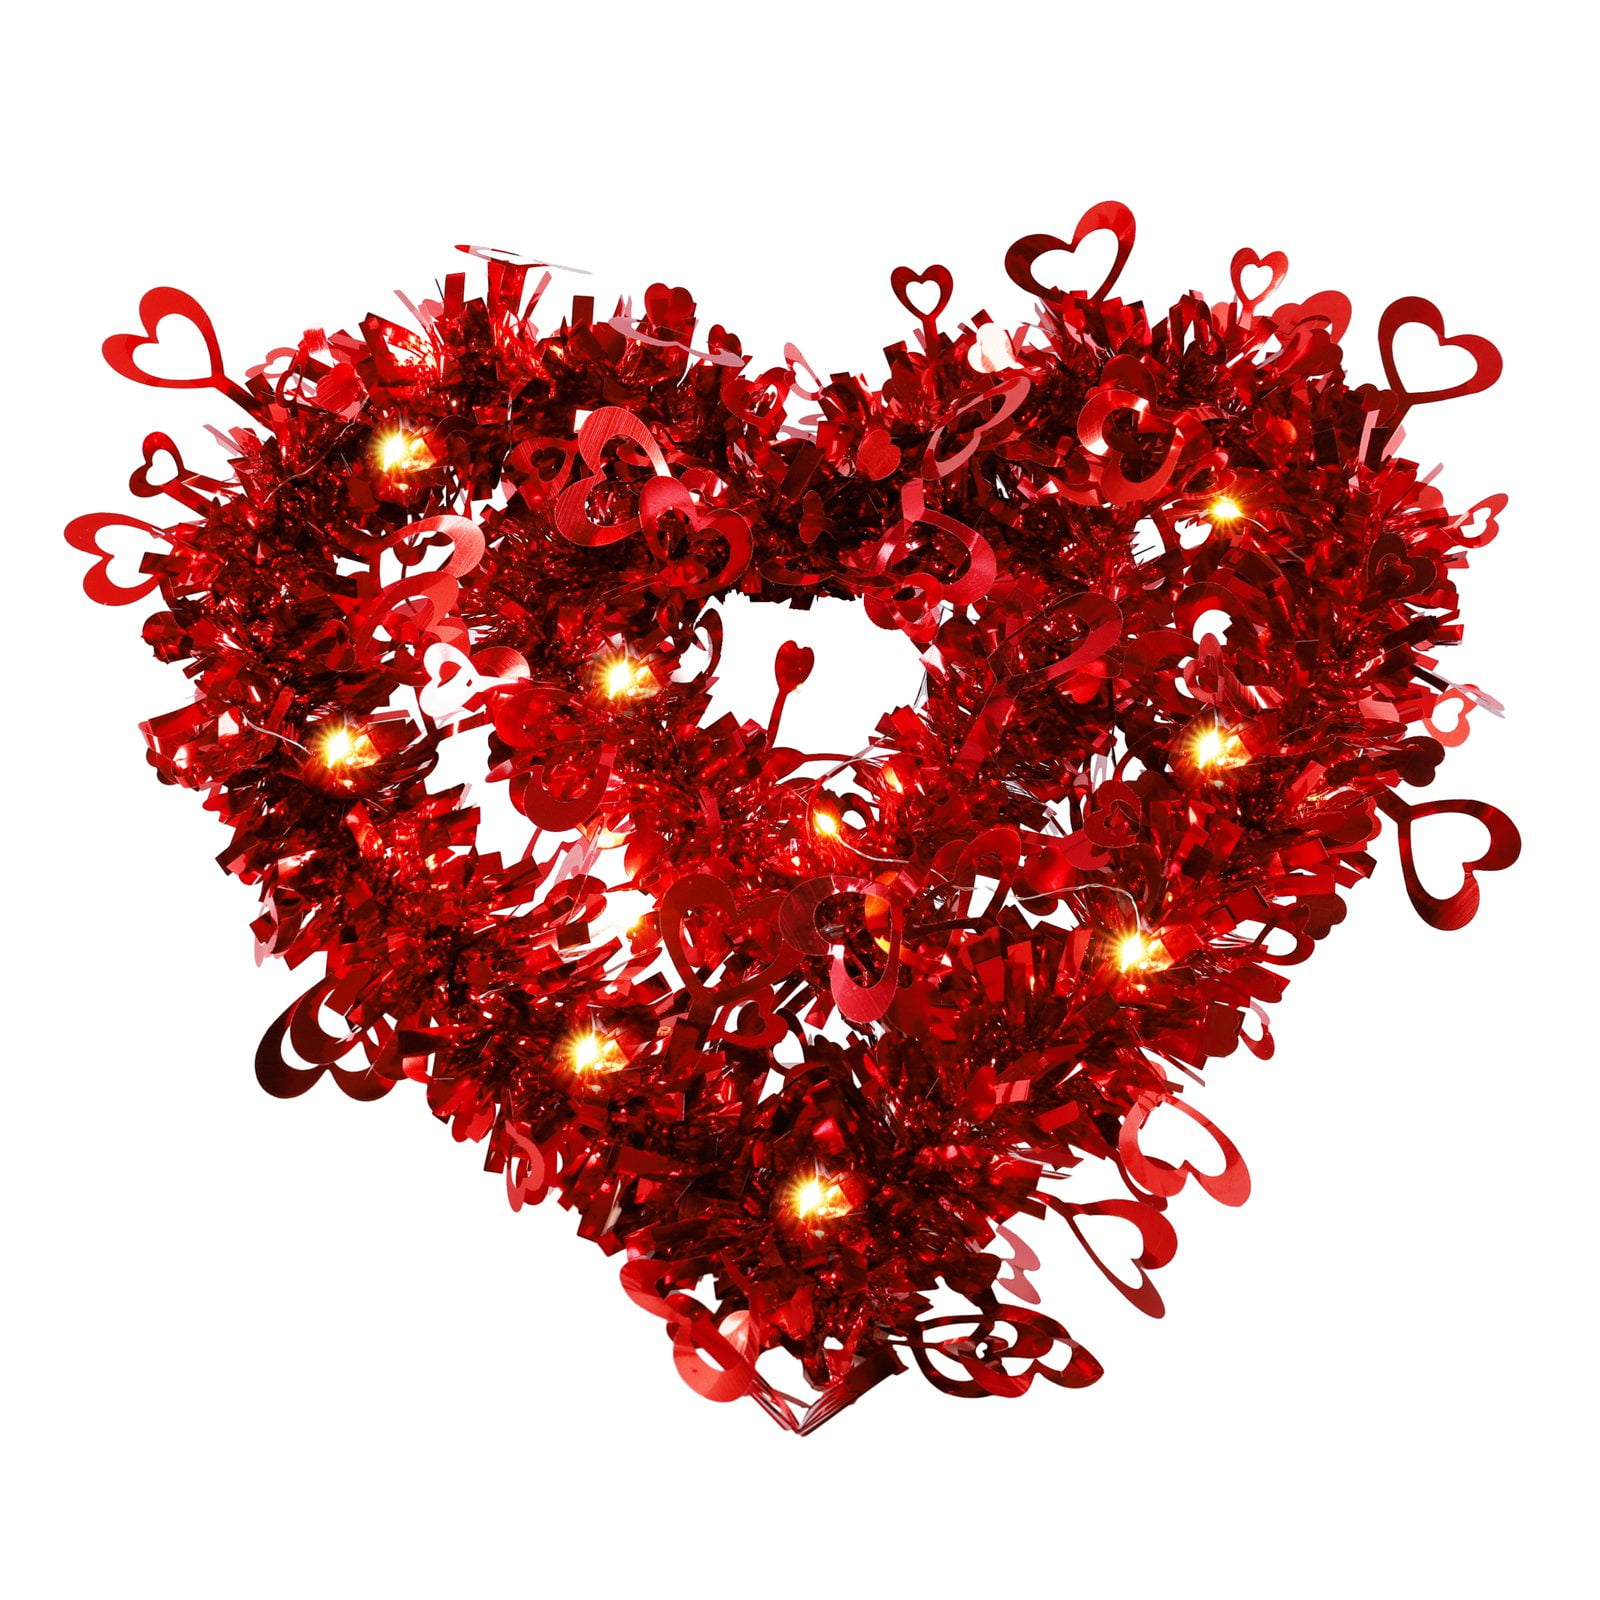 Valentine Heart Wreath Valentine Heart Wreaths Tinsel Heart Shaped Wreaths  with Foil Hearts Hanging Valentine's Day Wreaths Decorations for Wedding